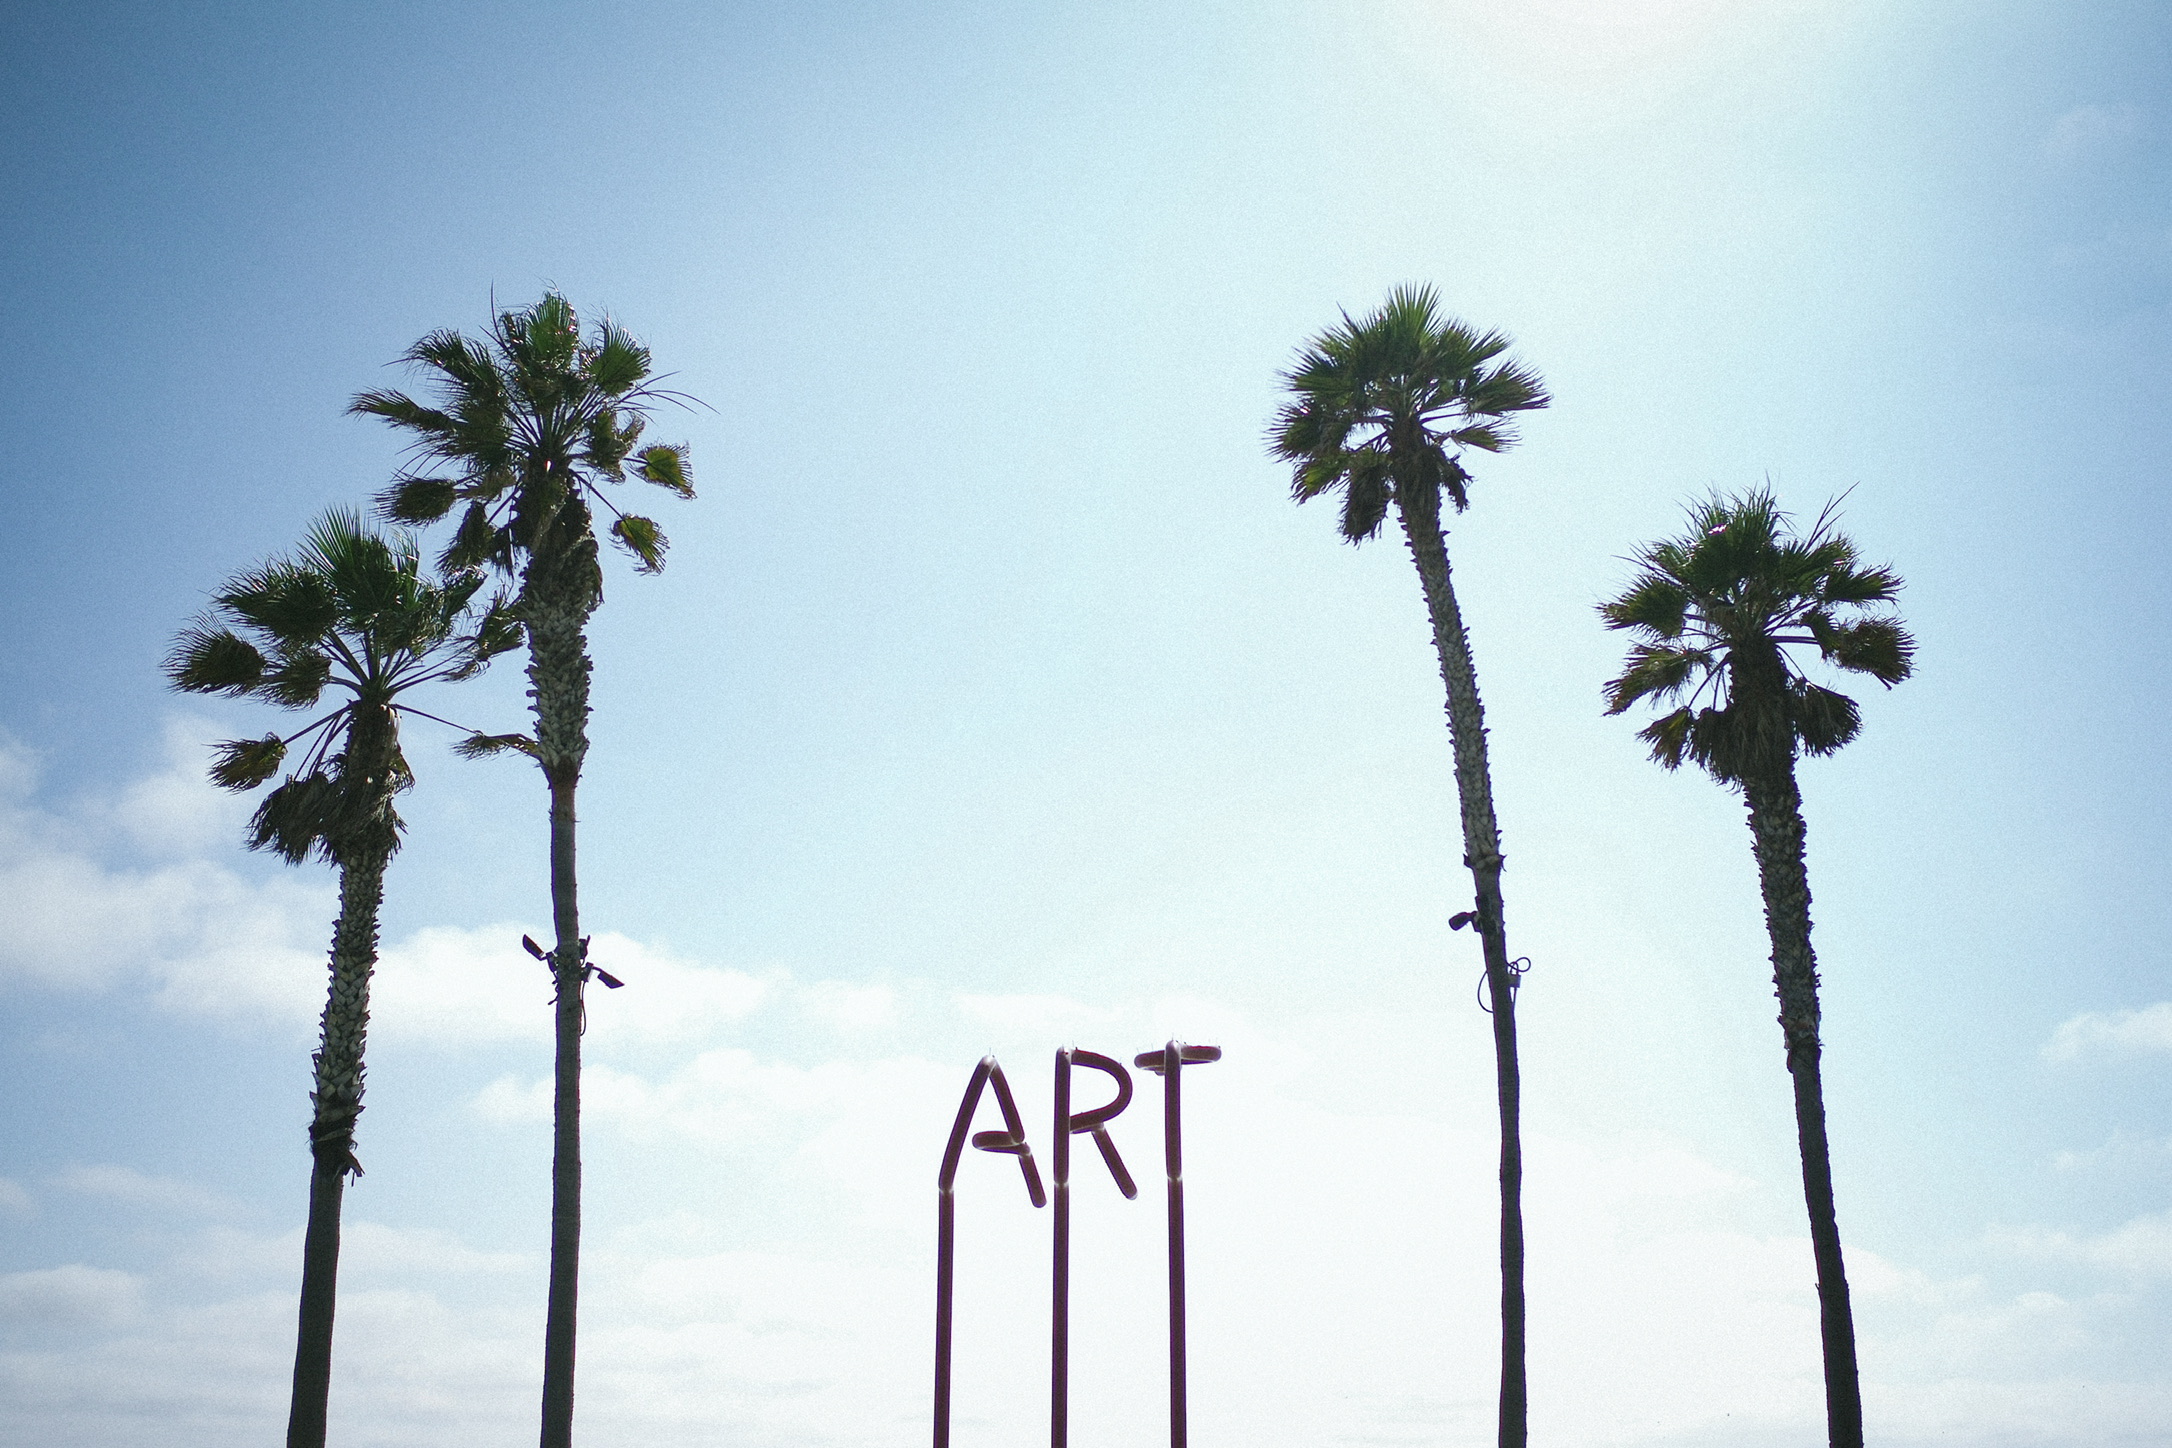 An art installation reads ART and is flanked by two palm trees on both sides, set against a blue sky with clouds.